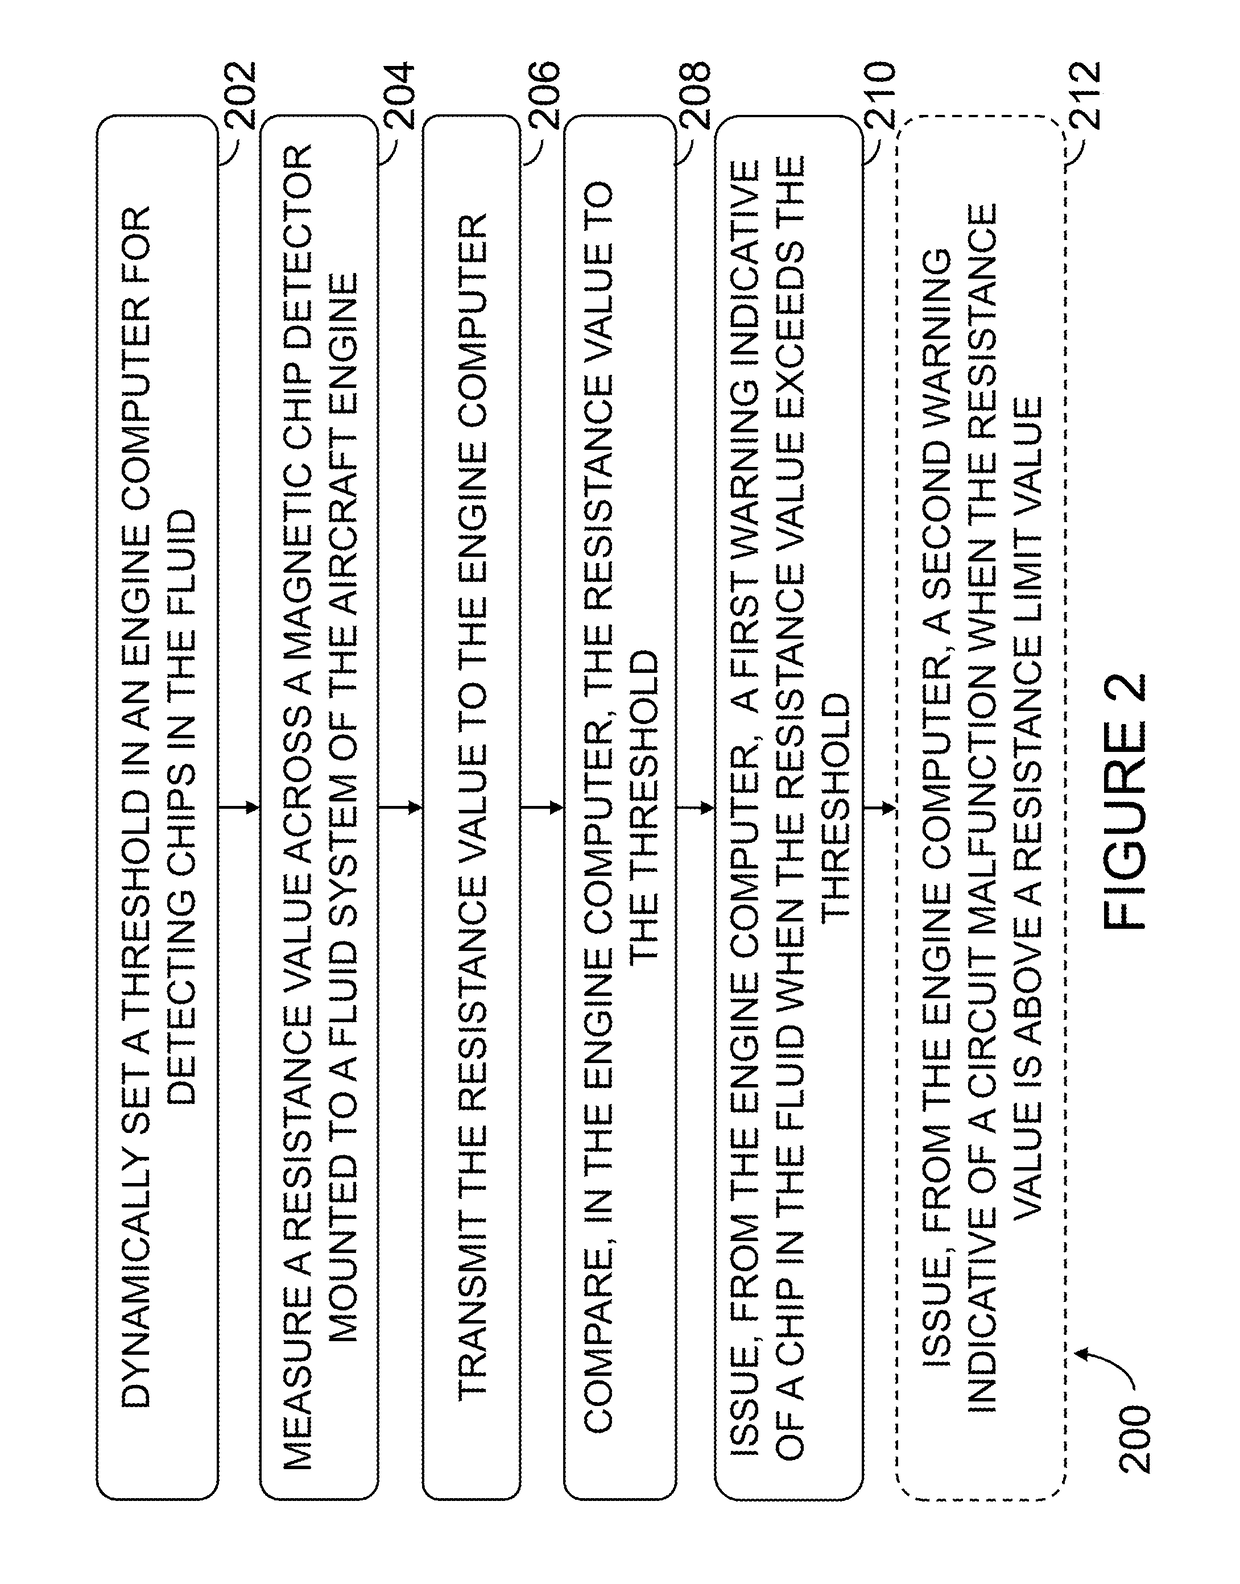 Systems and methods for detecting chips in fluid of aircraft engine